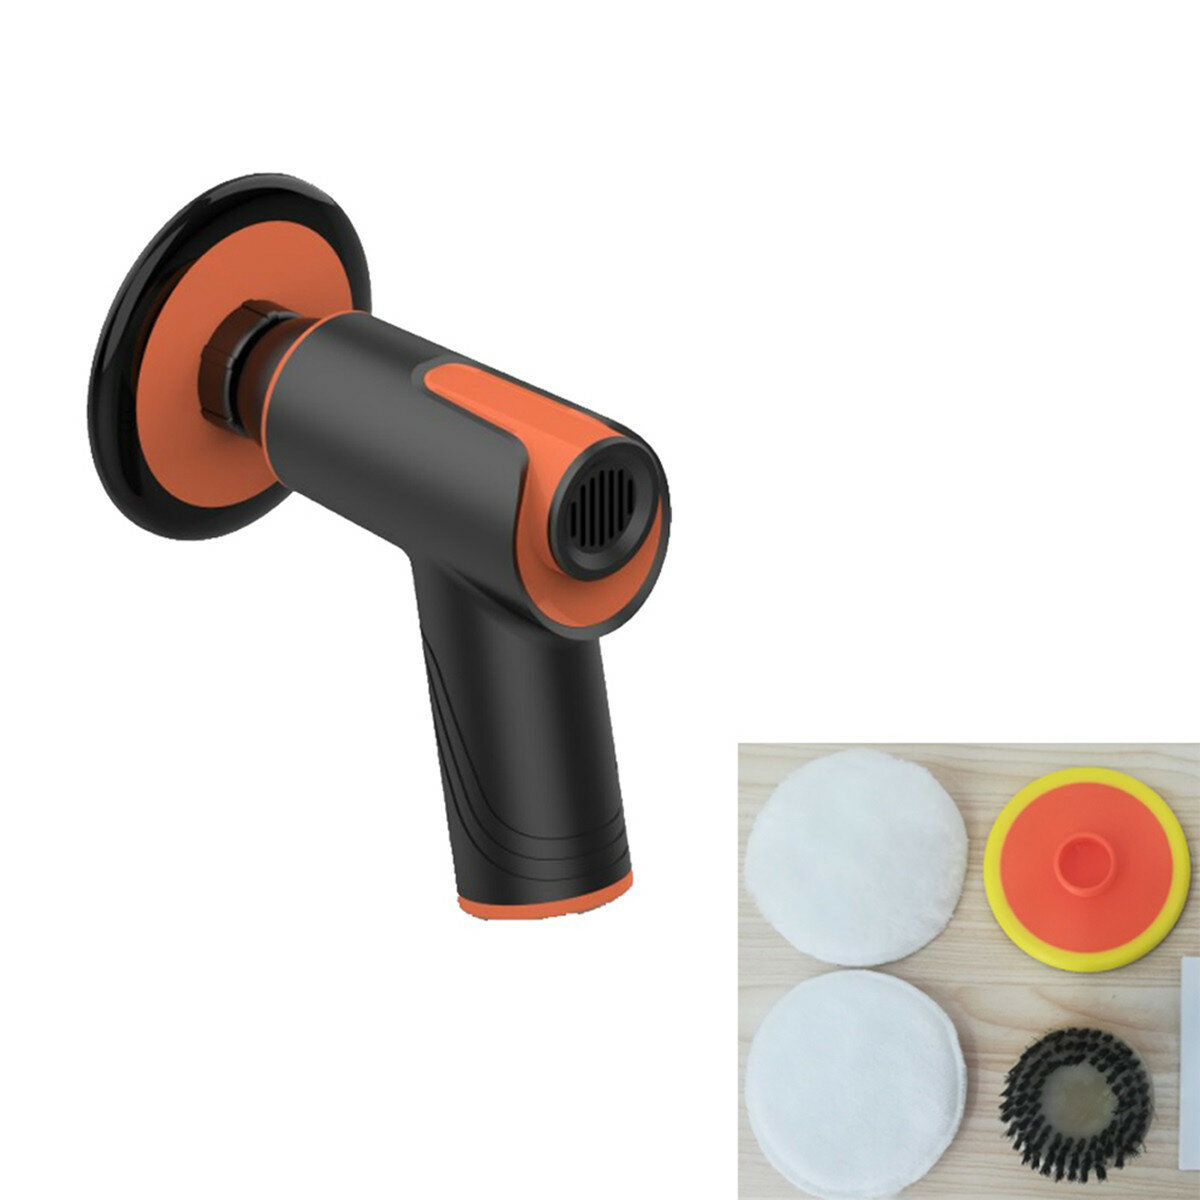 best price,100w,110mm,2000mah,rechargeable,polisher,coupon,price,discount